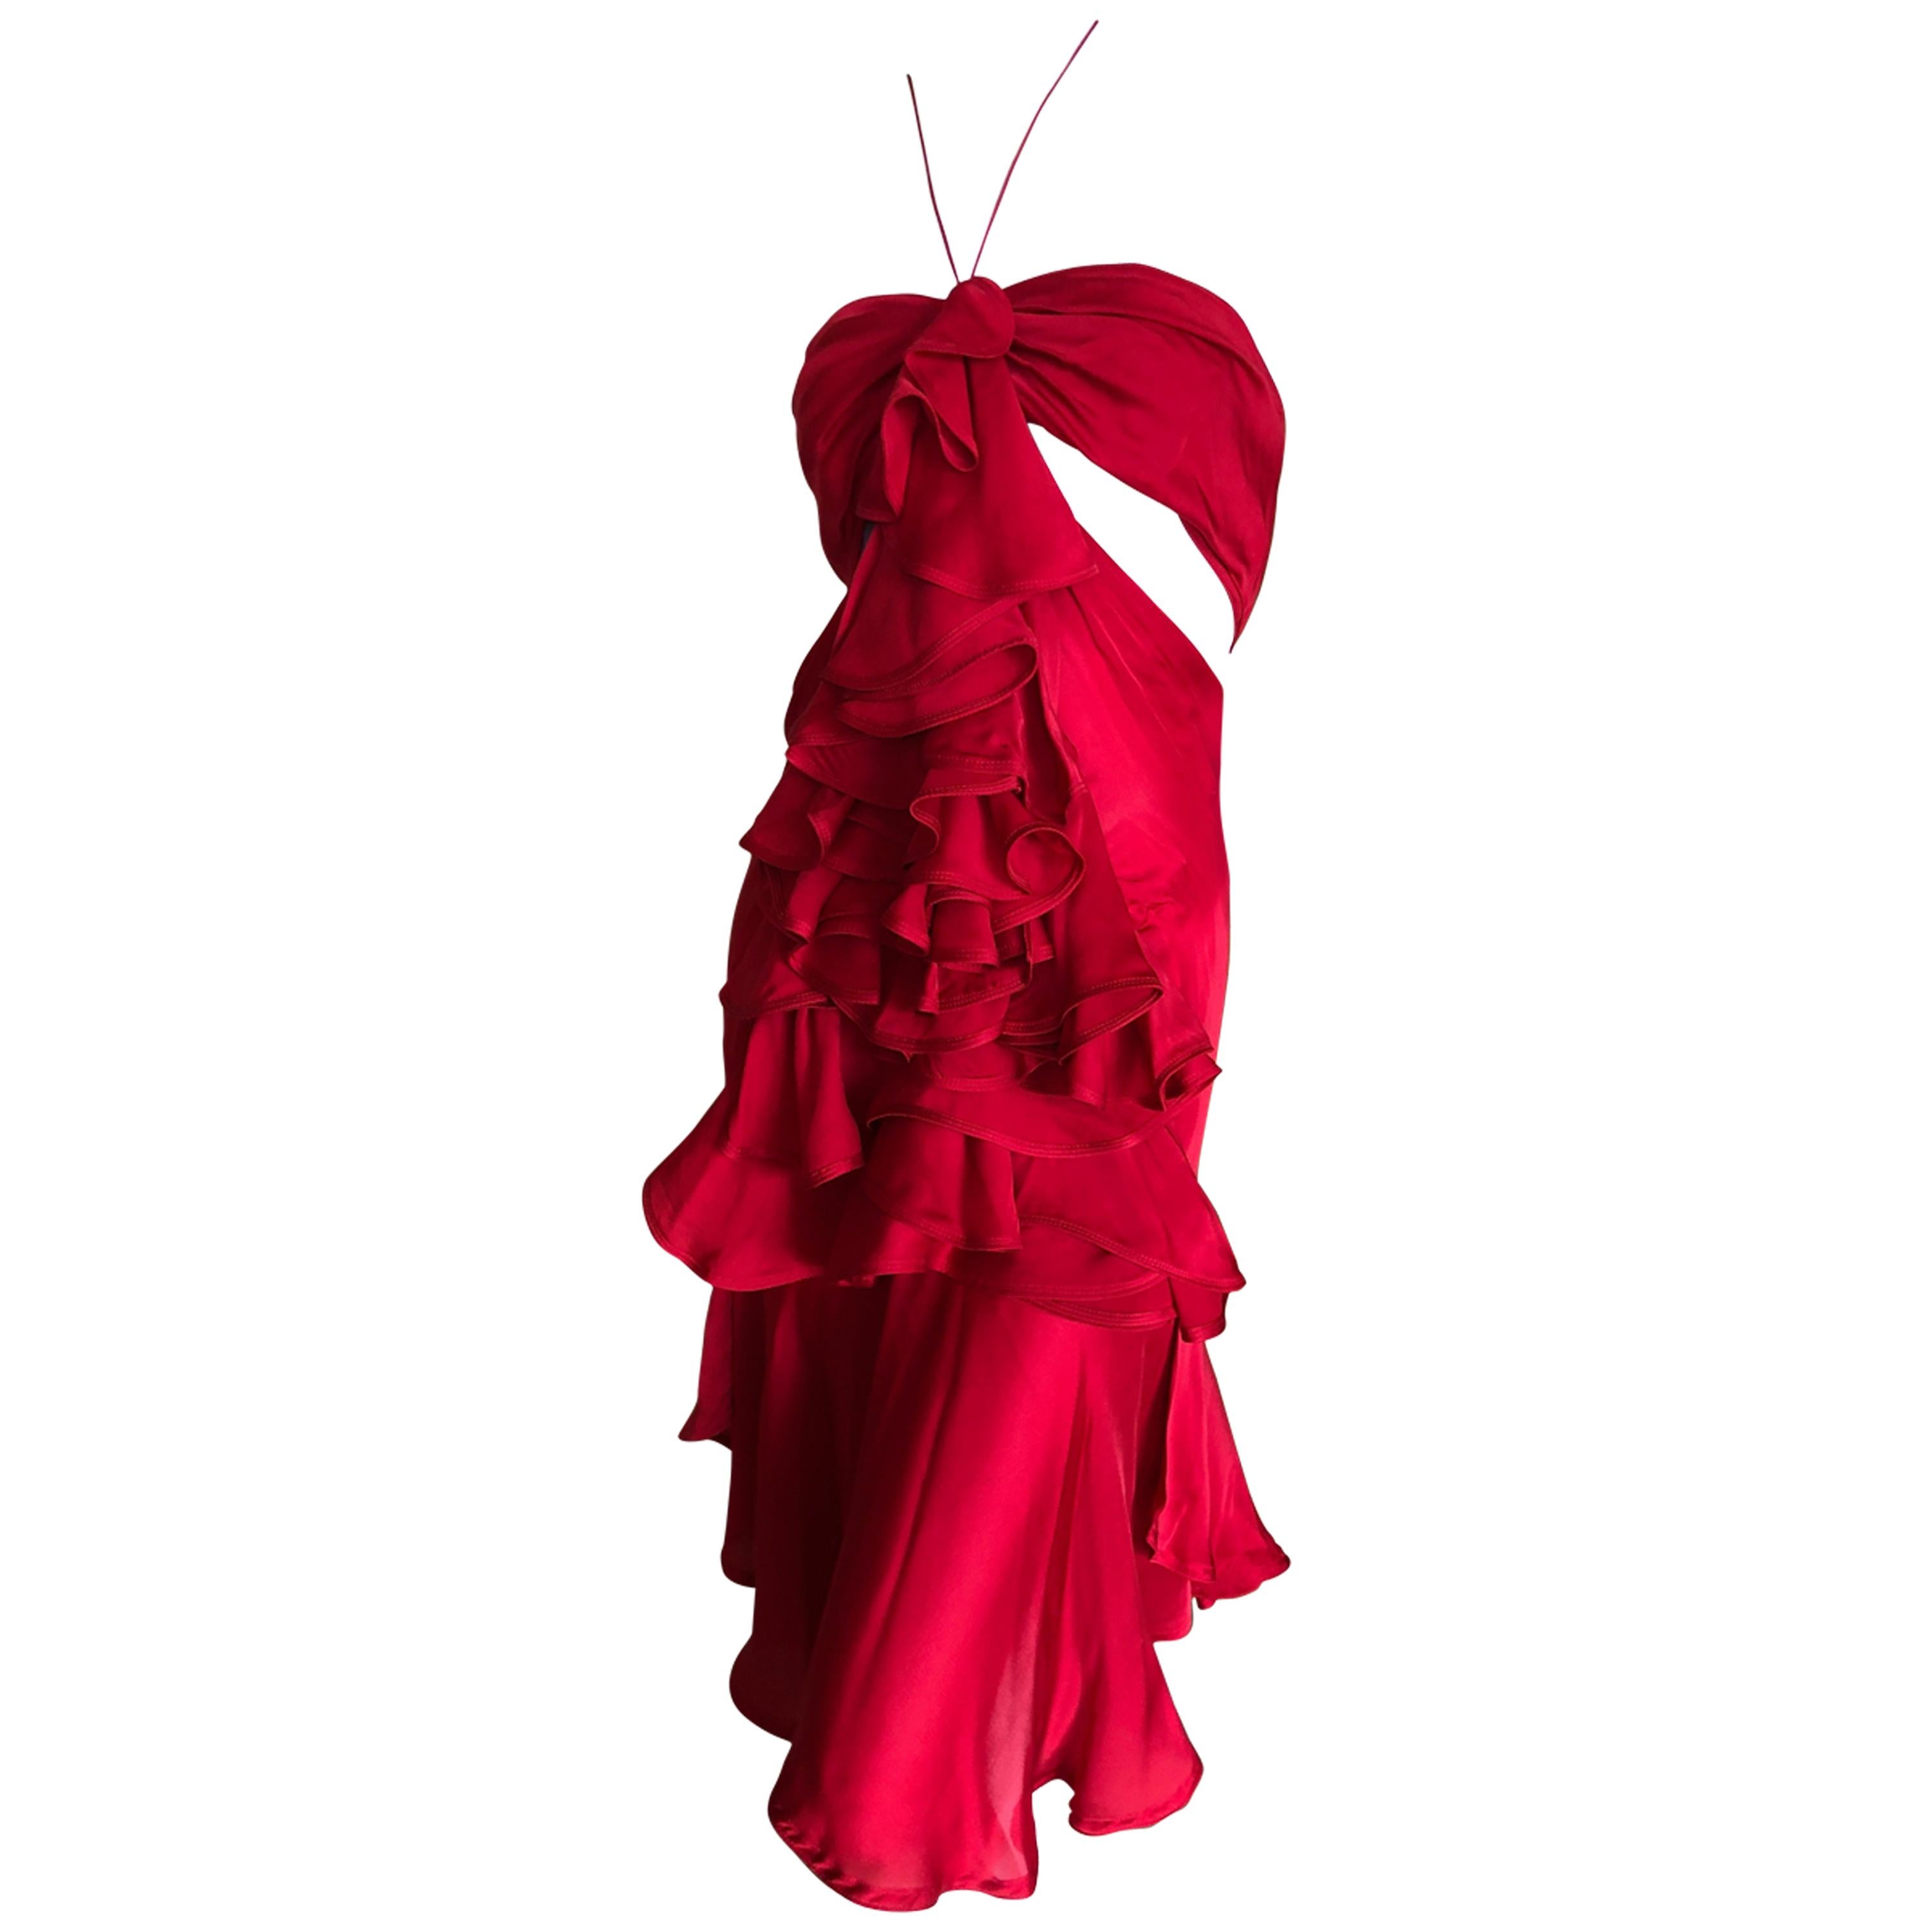 Yves Saint Laurent by Tom Ford 2003 Ruffled Red Silk Dress Size 40 For Sale